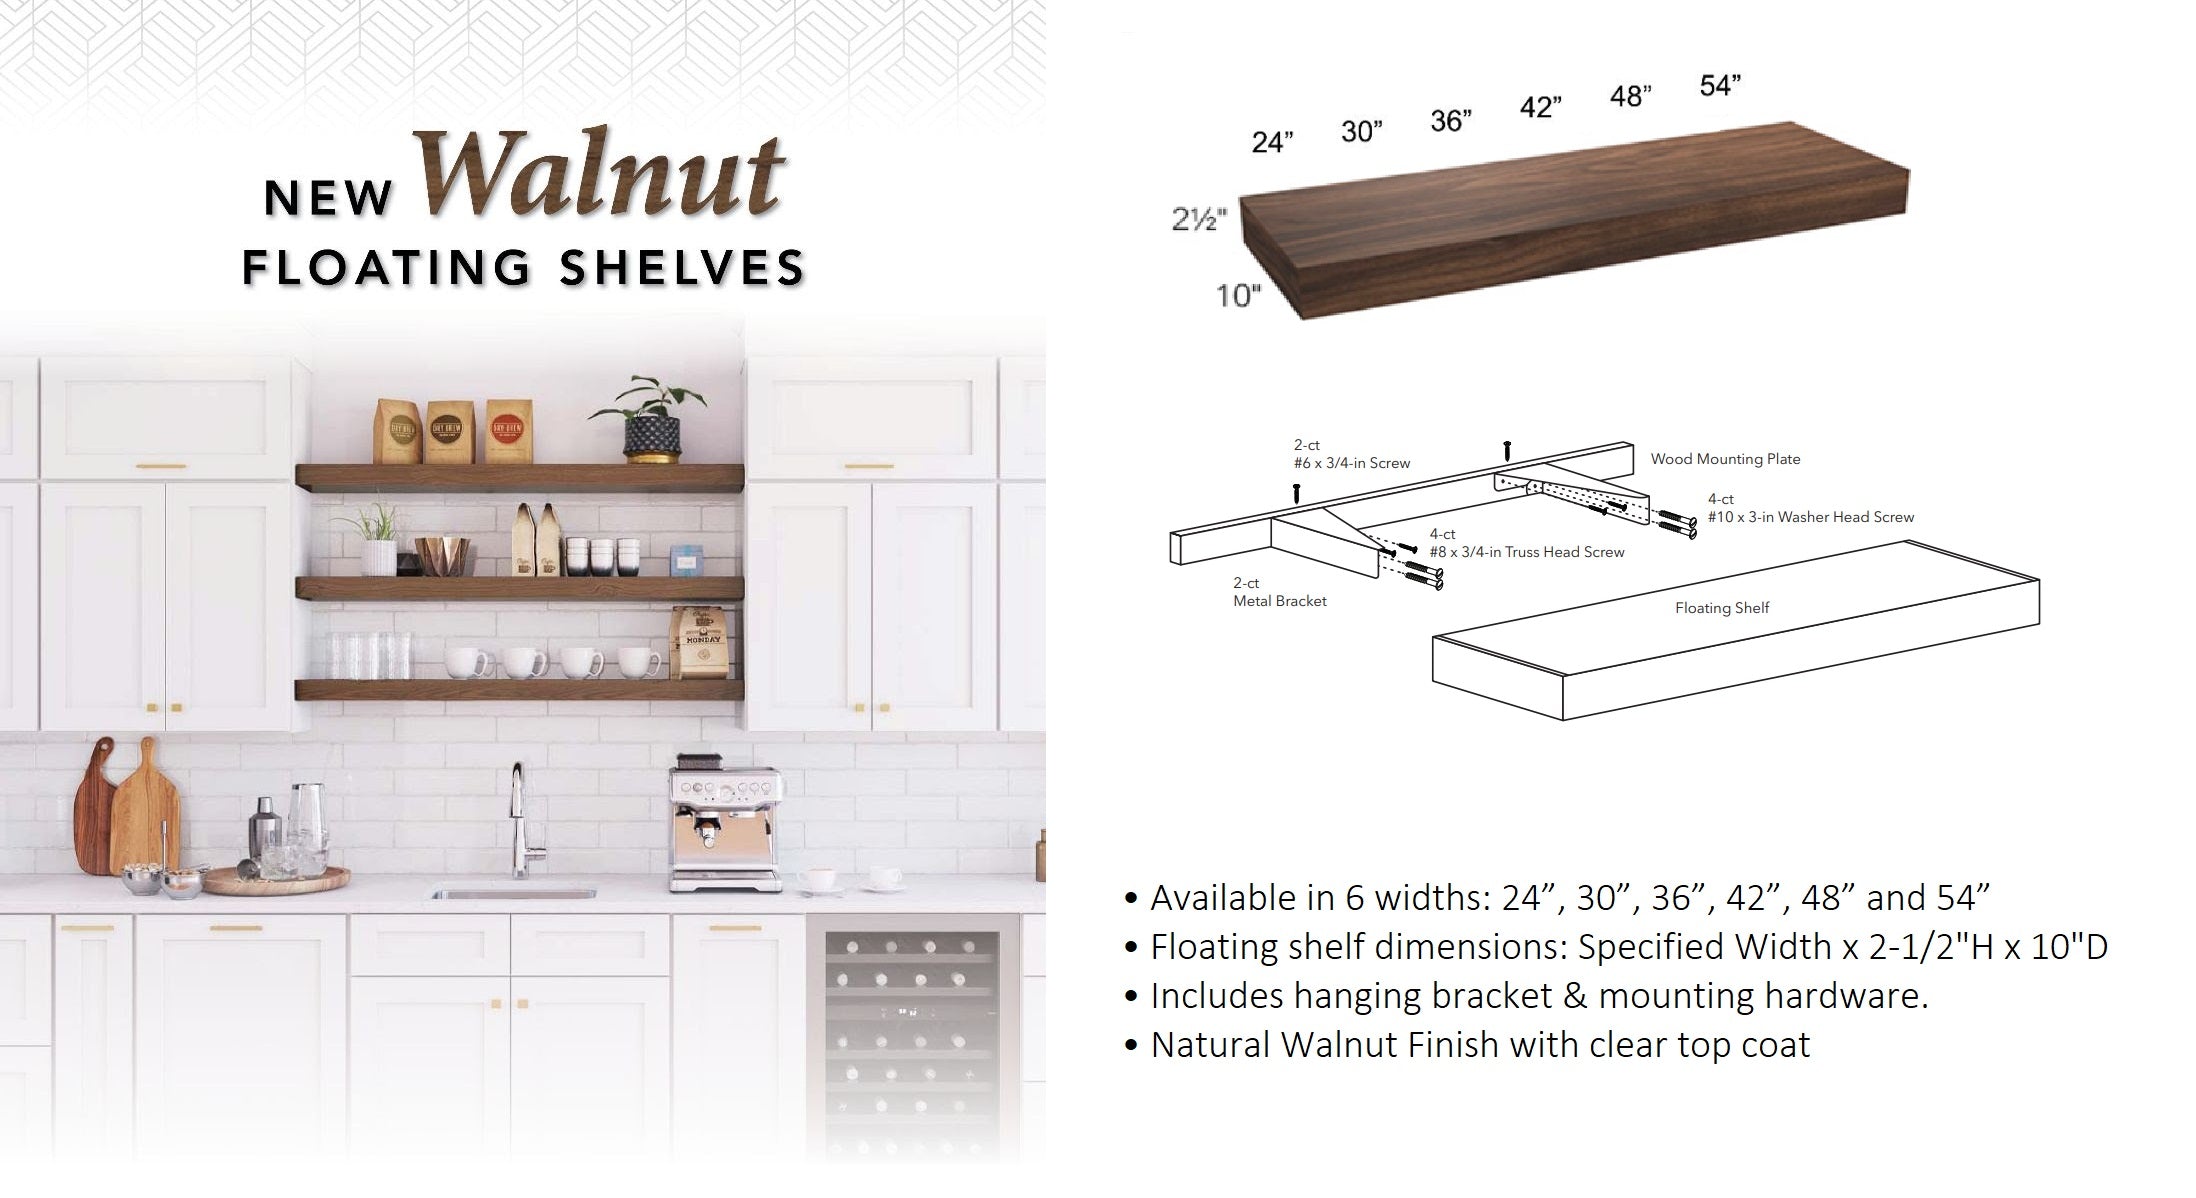 Walnut Floating Shelves by Fabuwood Cabinetry at DirectCabinets.com